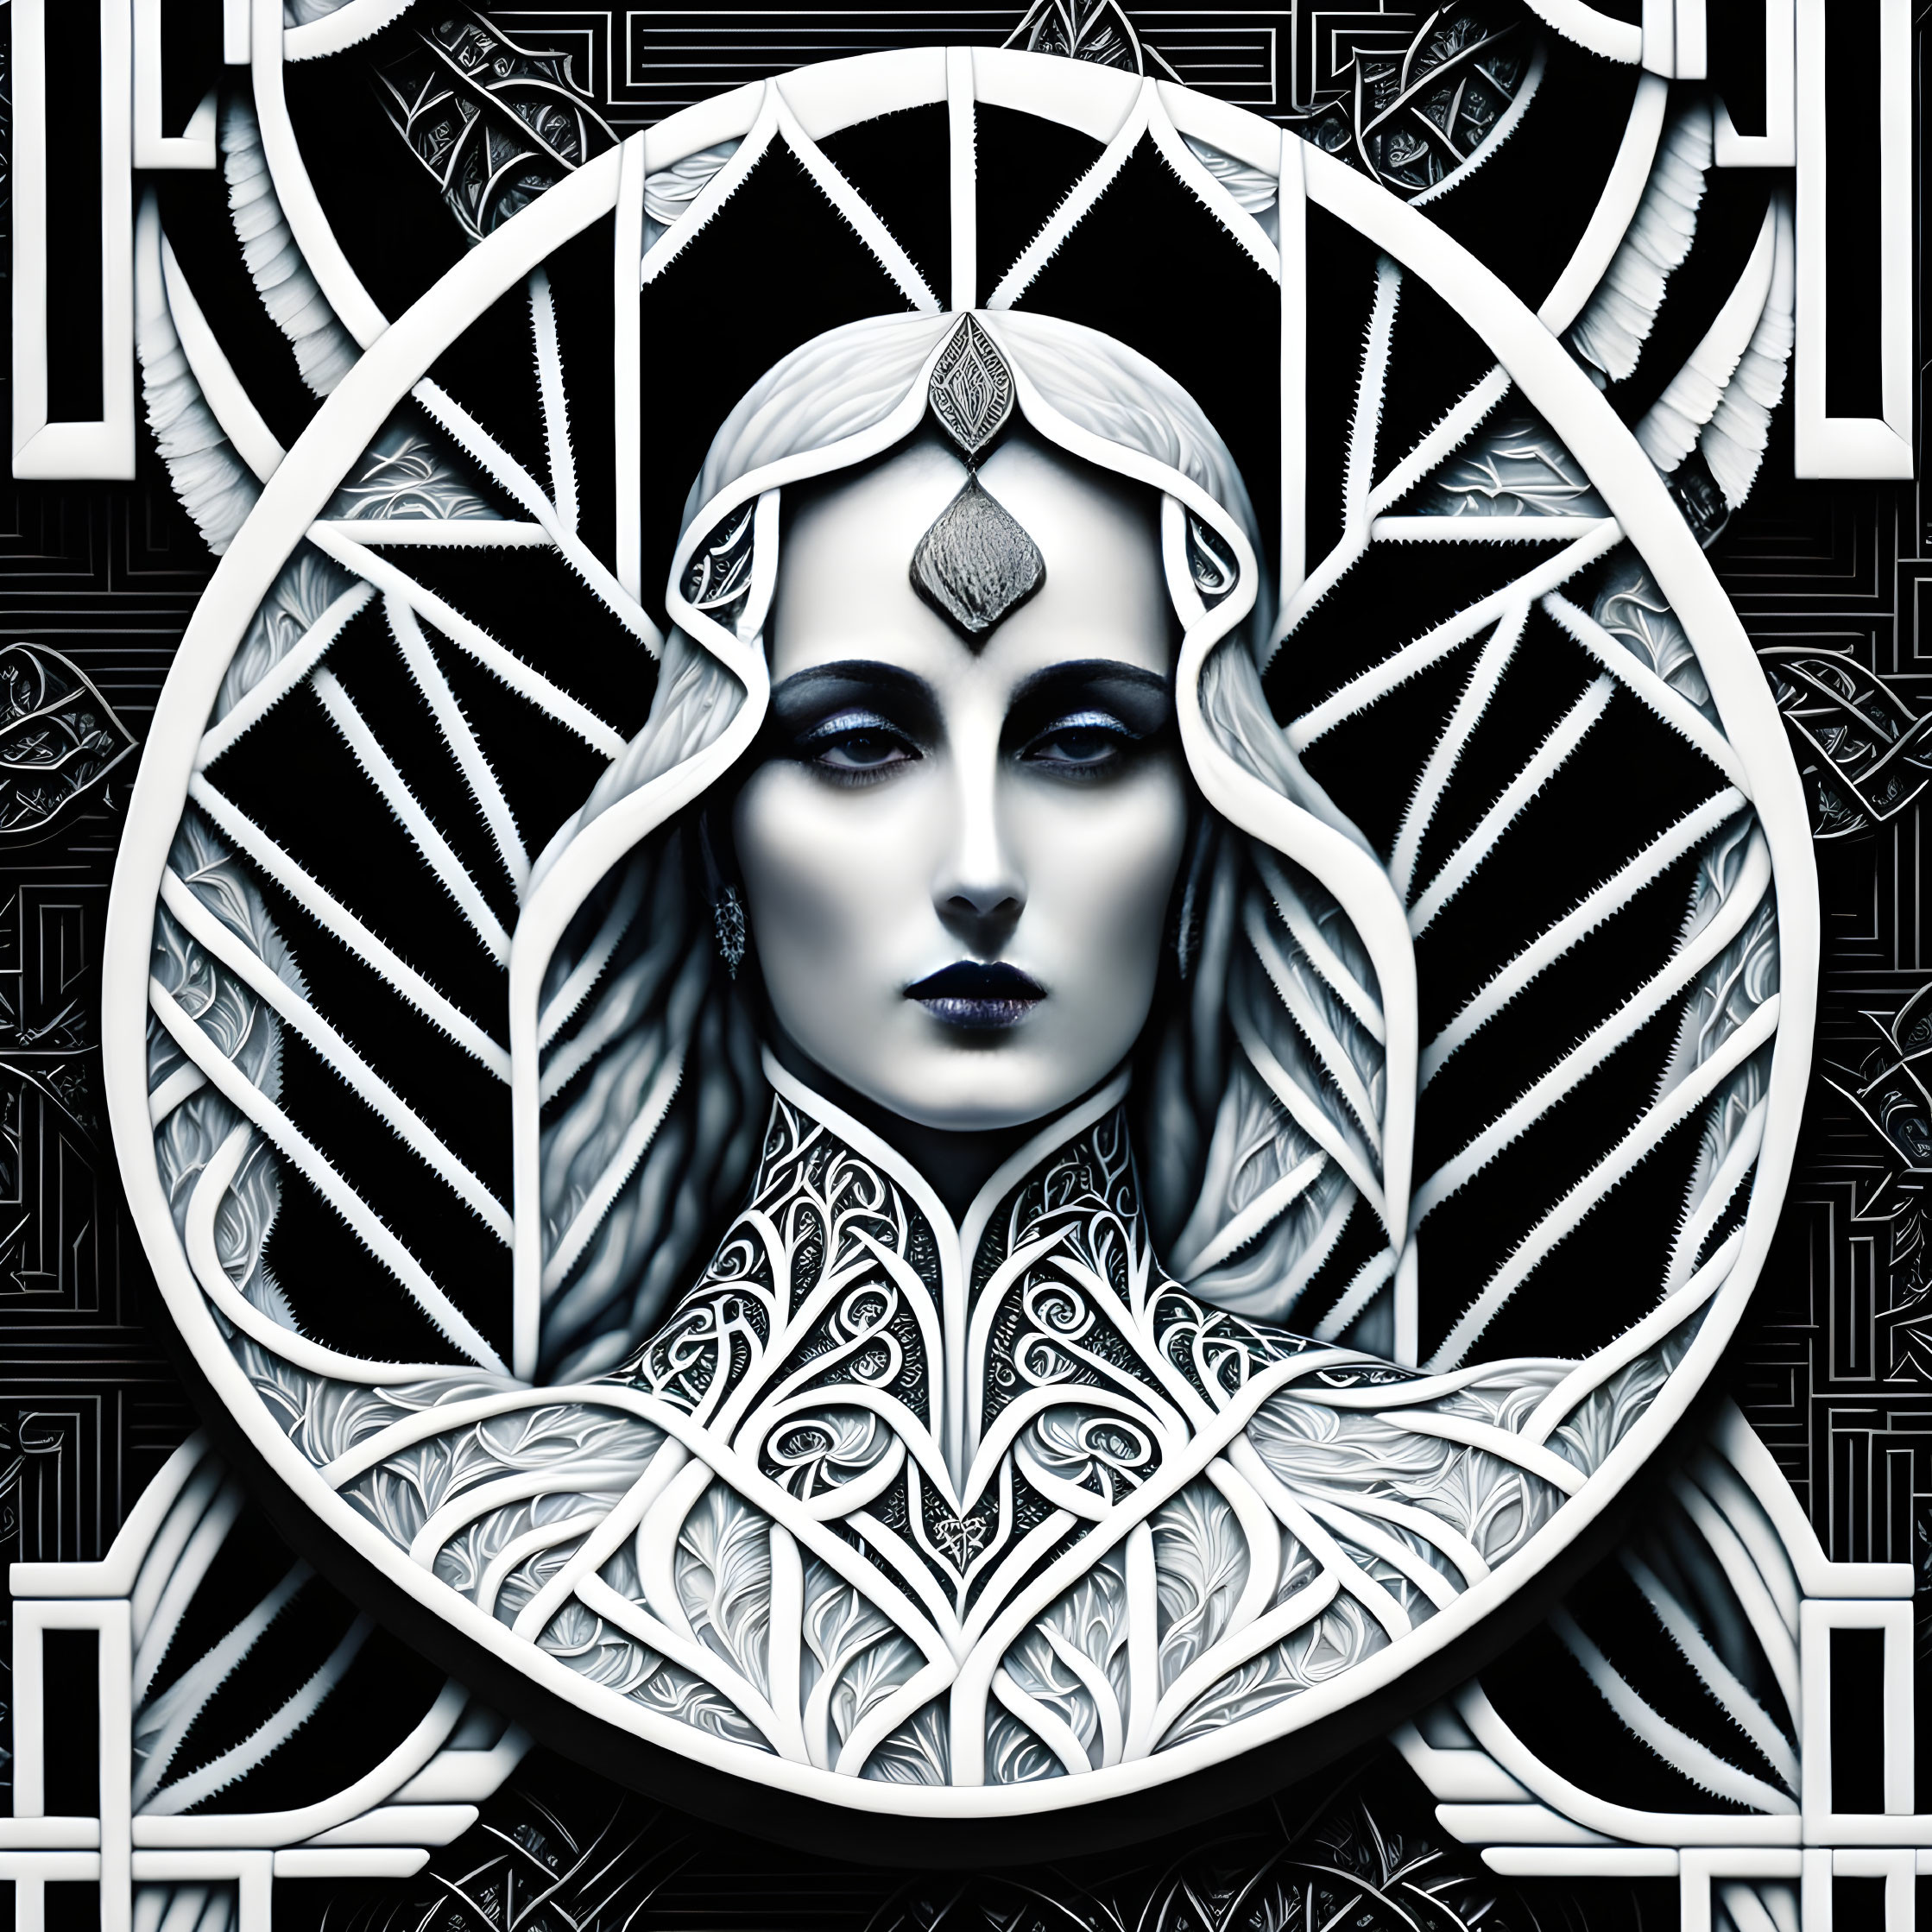 Monochrome graphic of woman with symmetrical patterns and geometric shapes in circular border